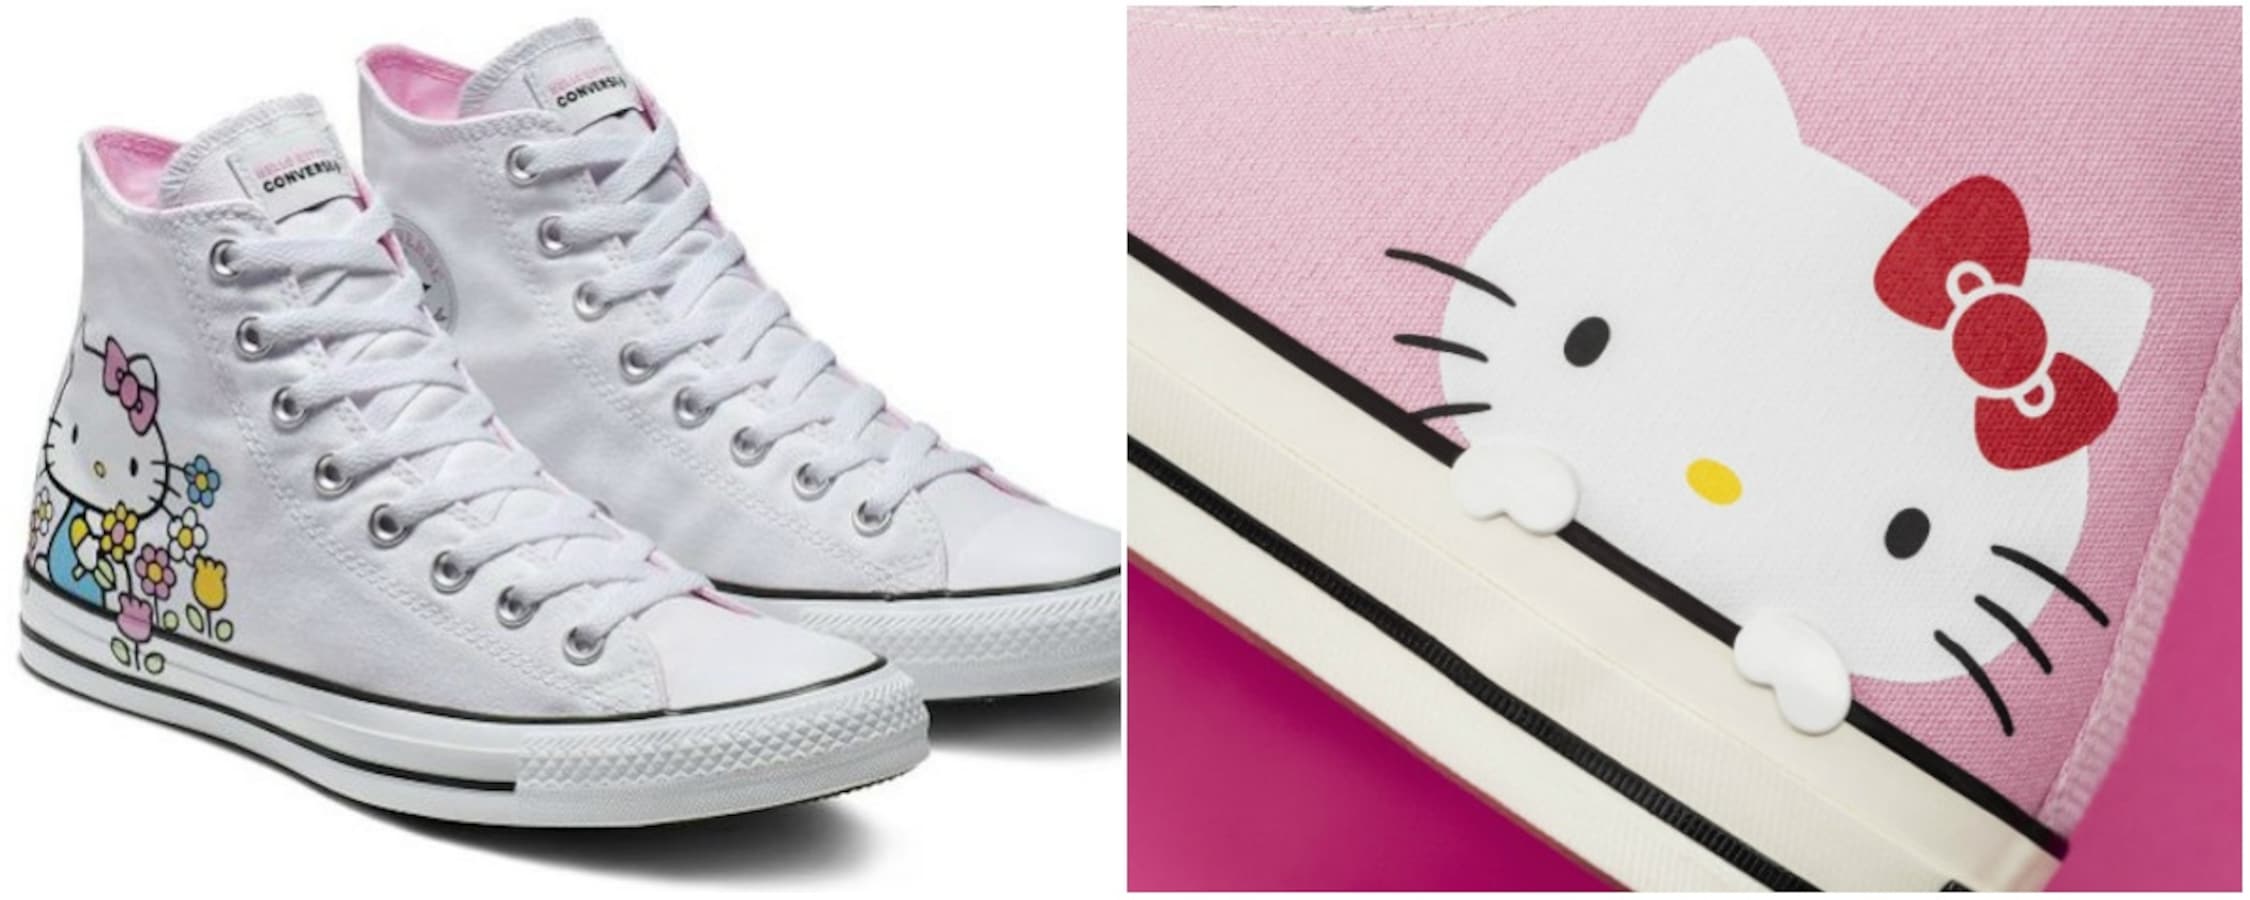 Hello Kitty Coming to Converse Sneakers! | All About Japan